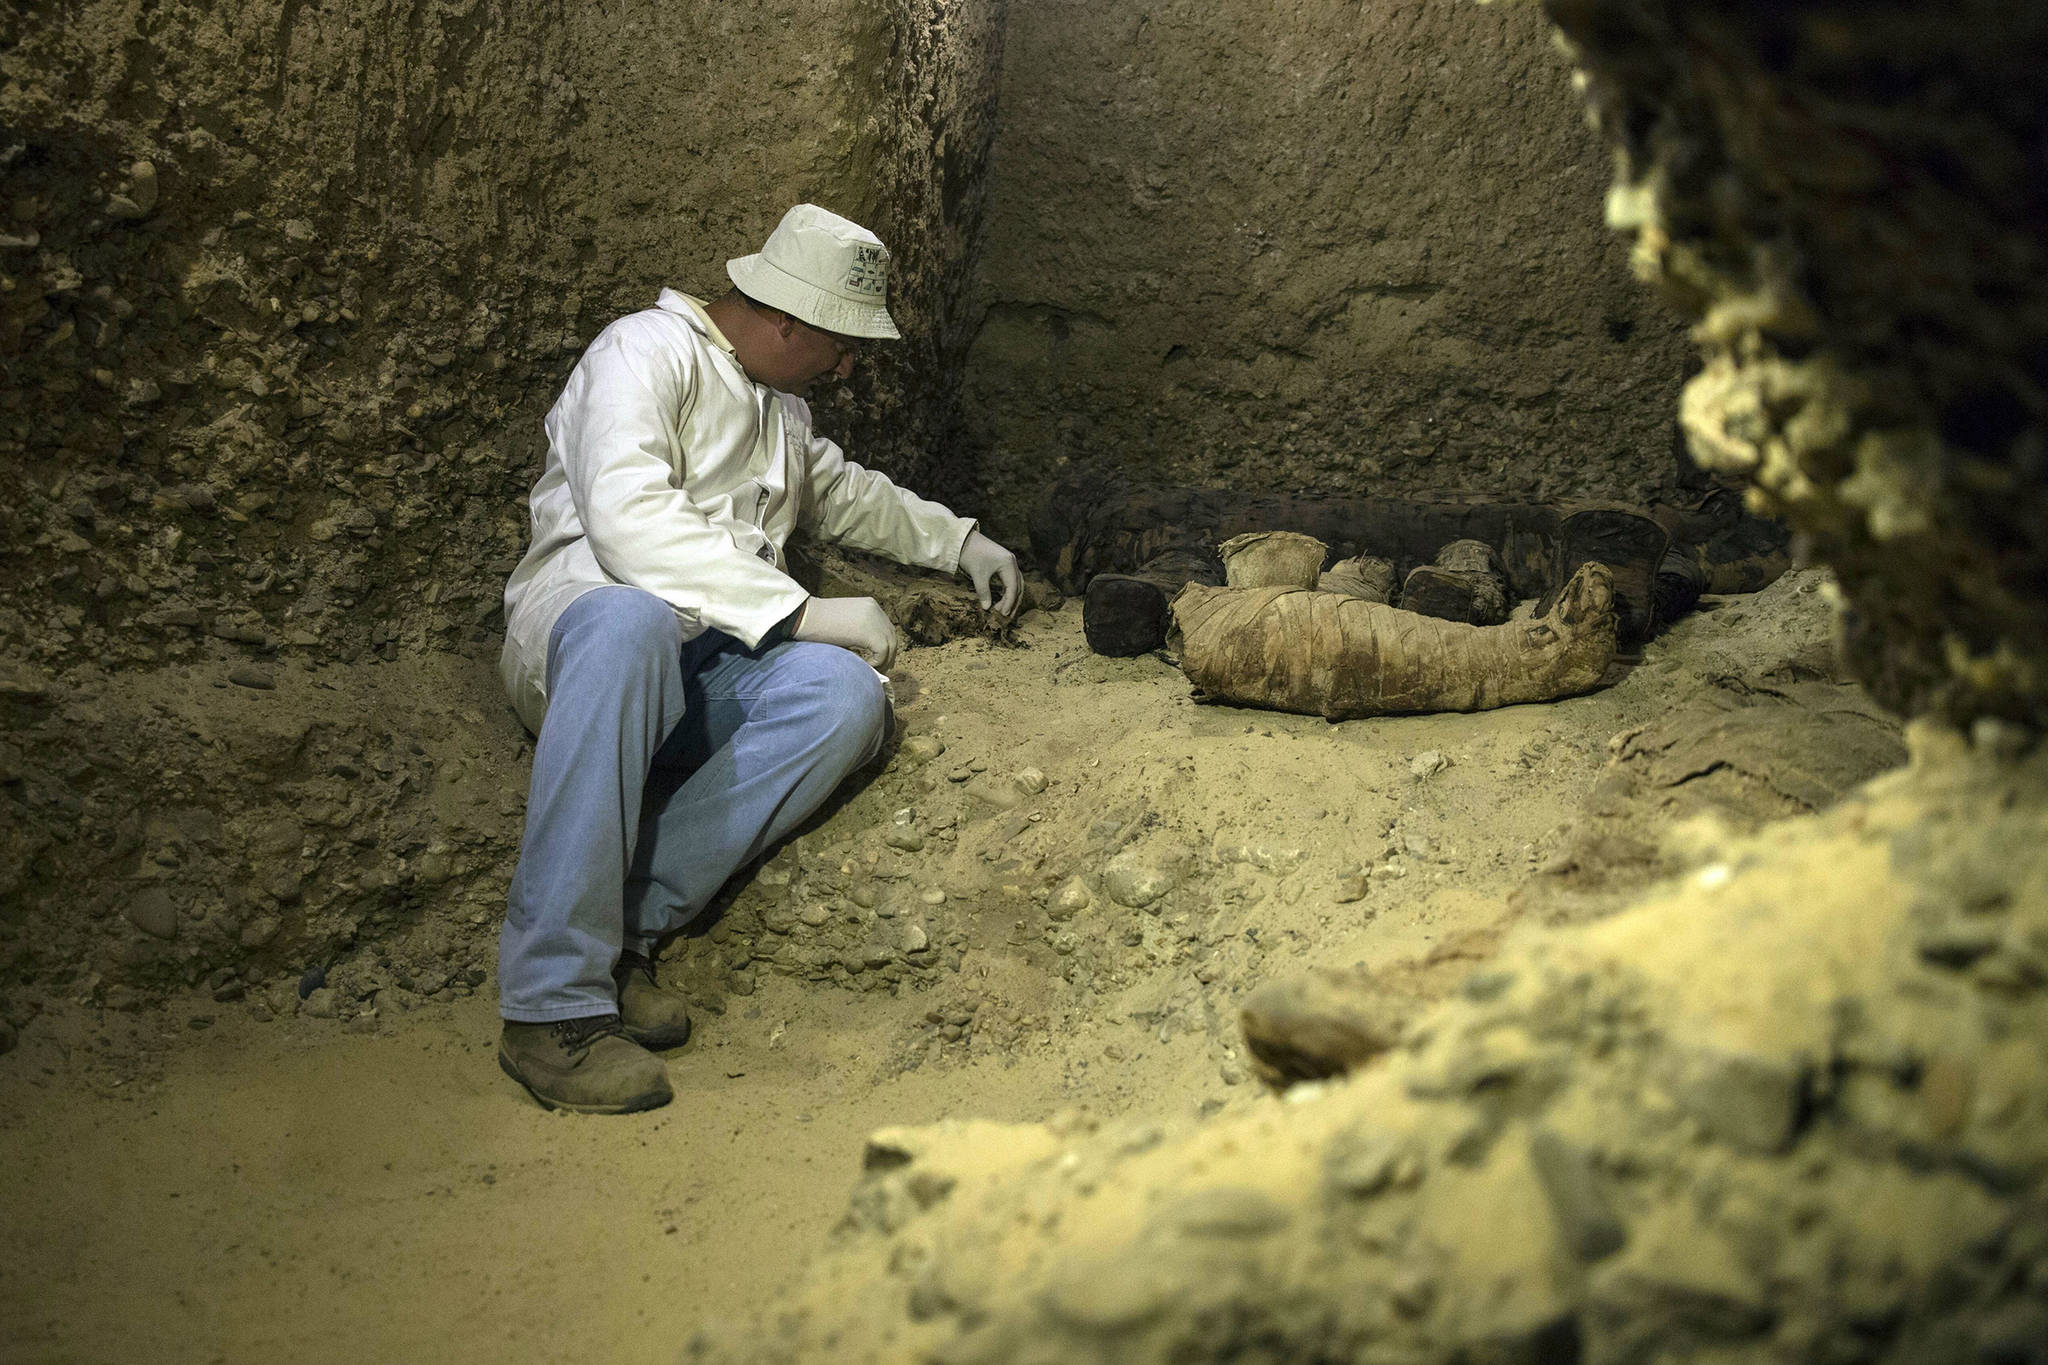 An archeologist looks at mummies discovered in the desert province of Minya, south of Cairo, Egypt, Saturday, Feb. 2, 2019. On Saturday Egypt announced that it found a number of ancient burial chambers cut in rock, carrying about 40 mummies that are in good shape, along with pottery, papyri and exquisite mummy cases. Officials told reporters at the site that the chambers, which were cut out of rock, belonged to a middle-class family that probably lived during the Ptolemaic, early Roman or Byzantine period. (AP Photo/Roger Anis)